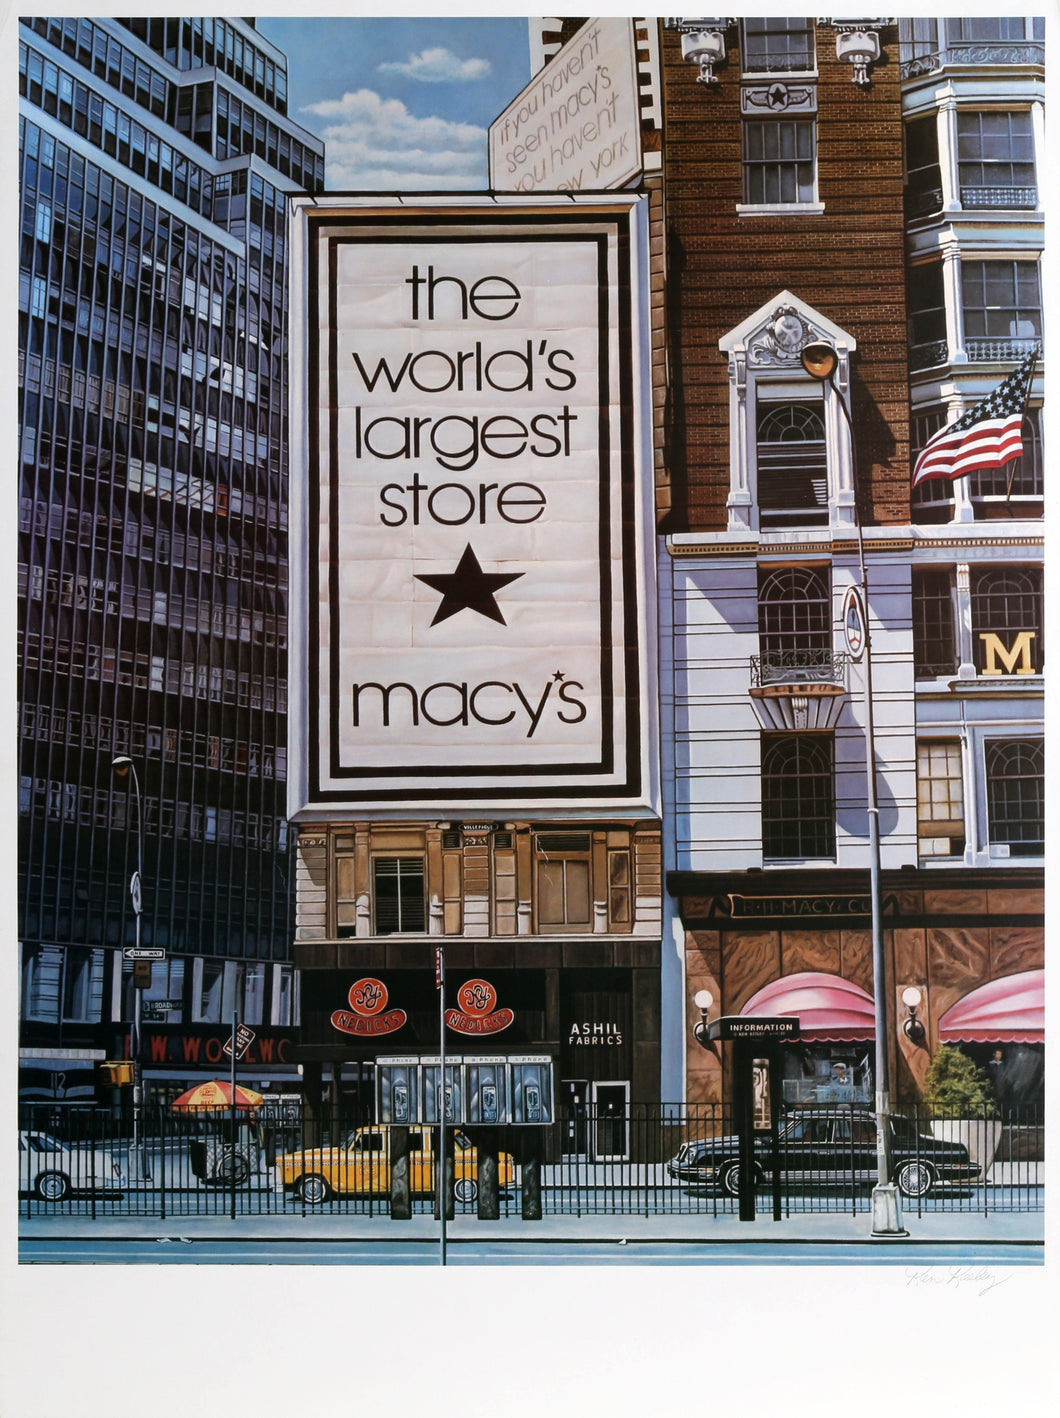 Macy's, The world's largest store Poster | Ken Keeley,{{product.type}}